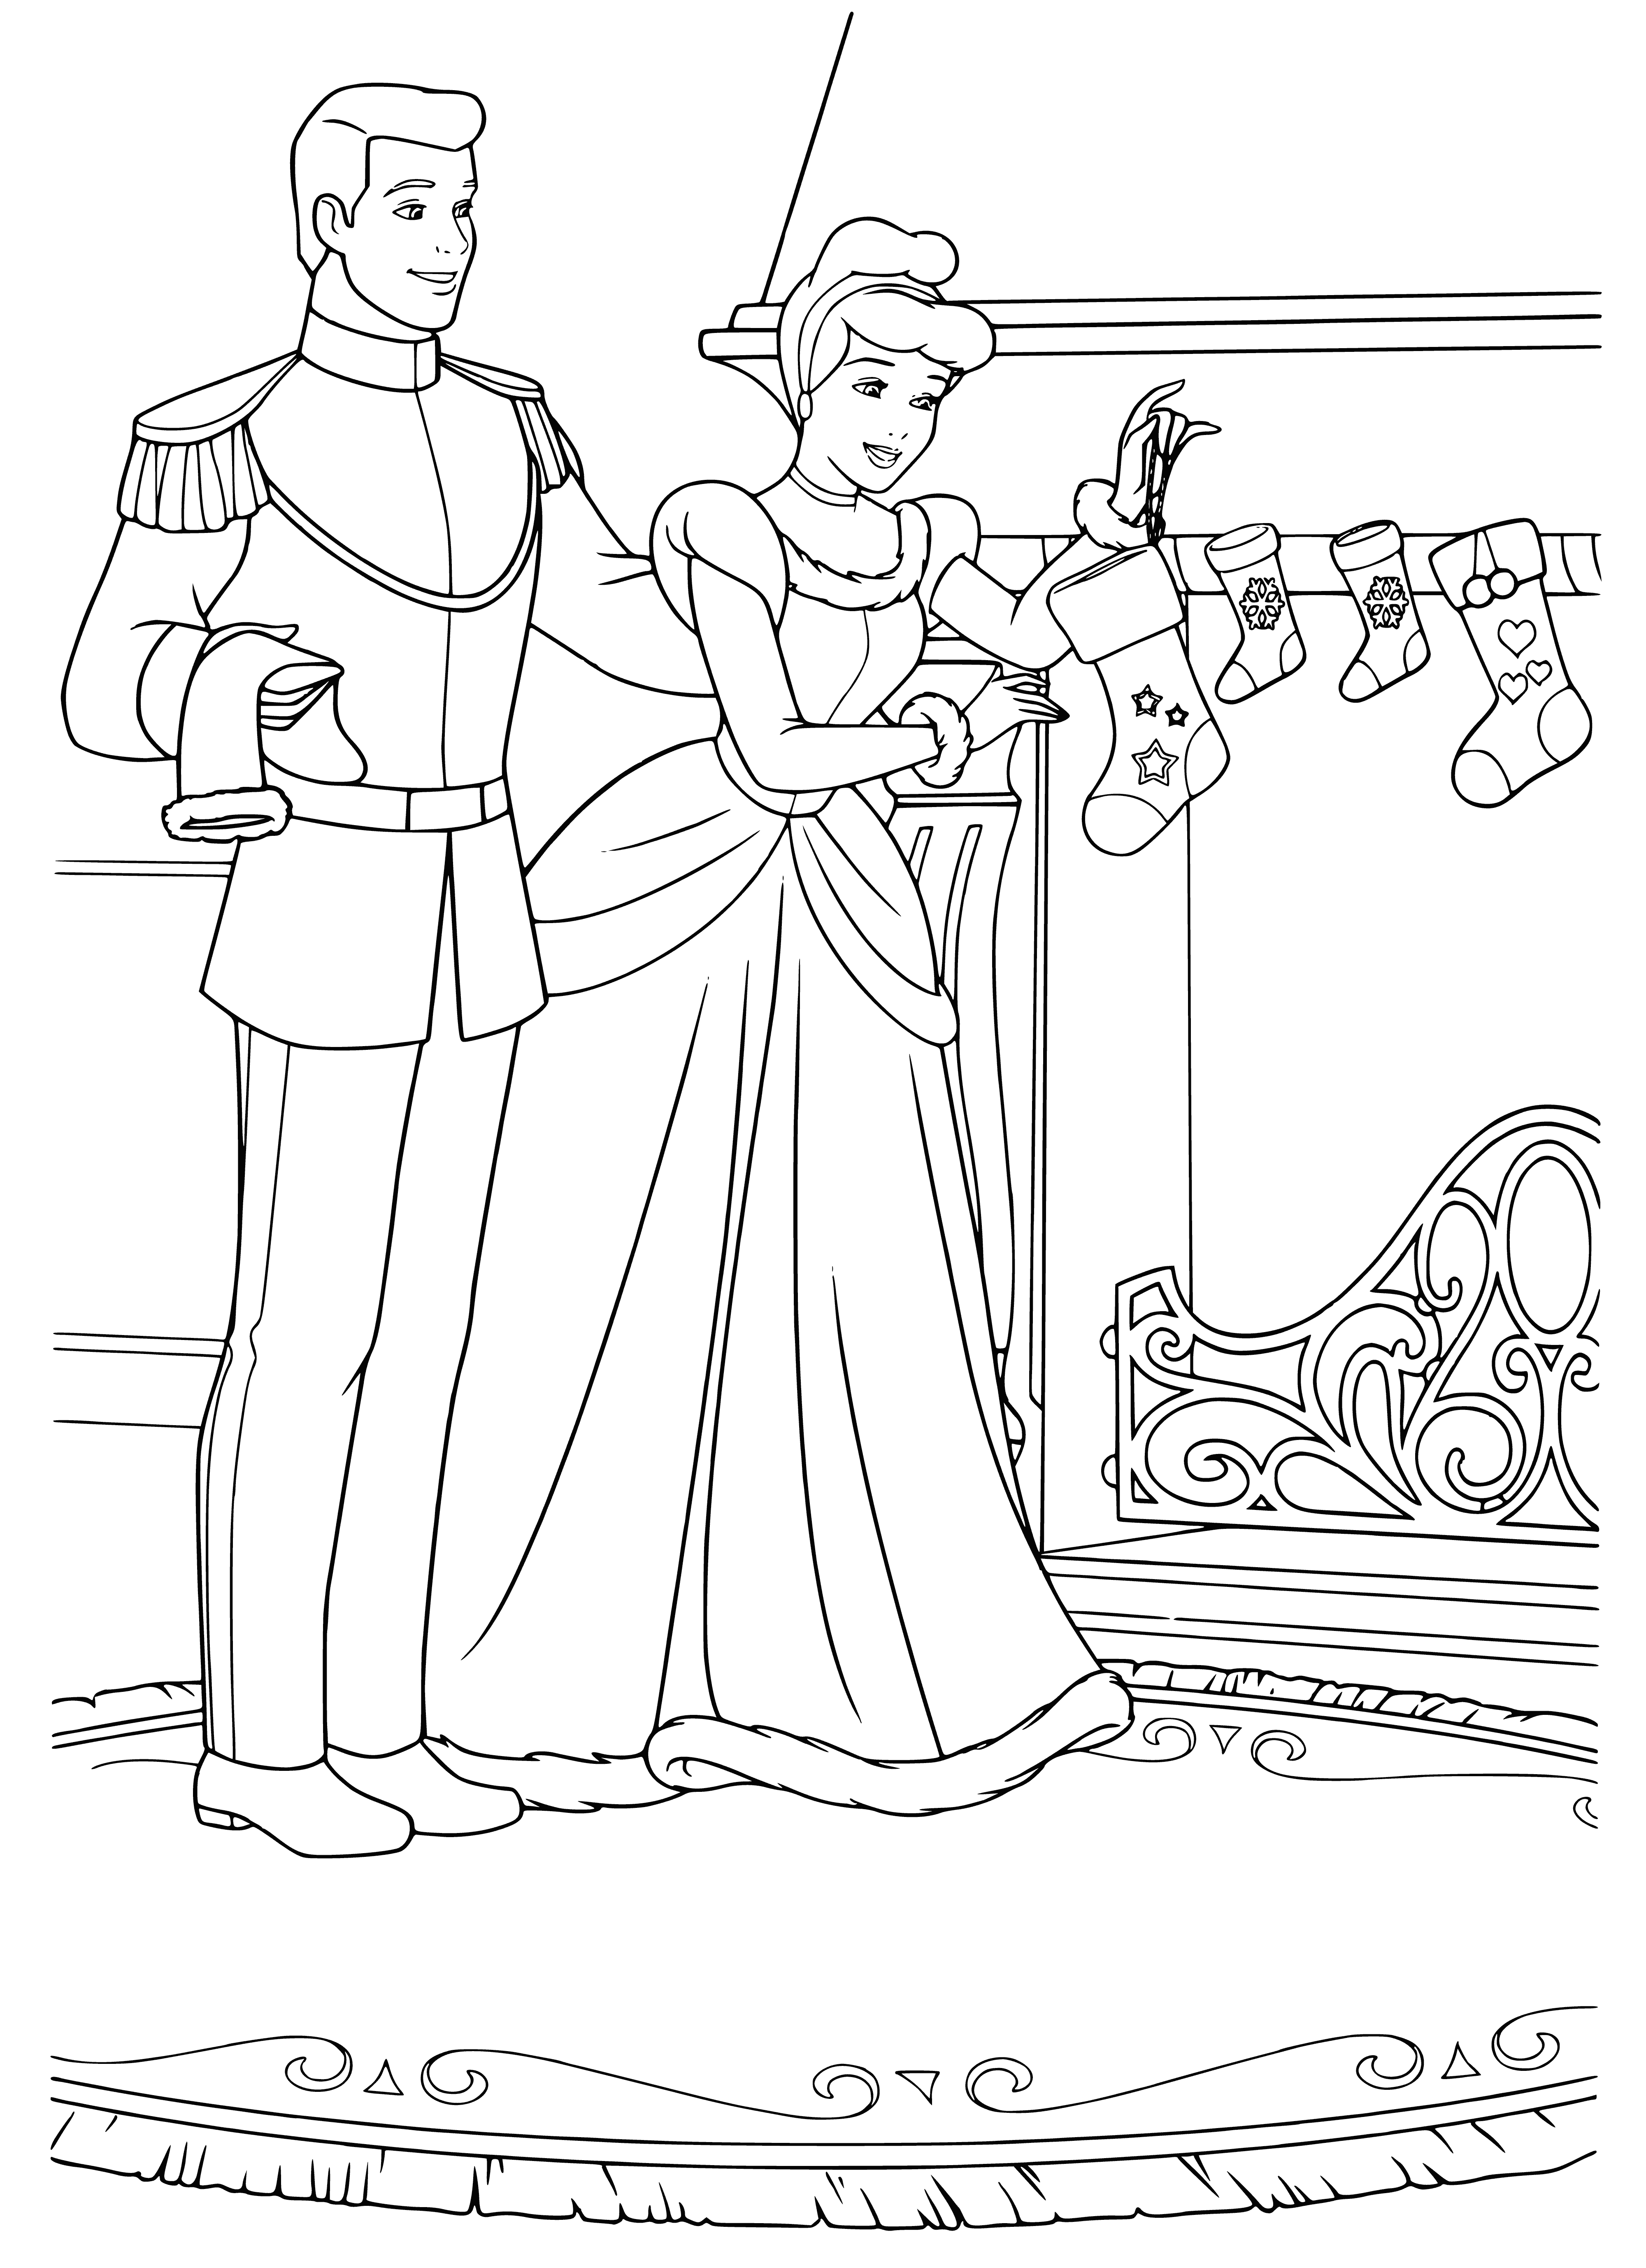 Cinderella and the prince by the fireplace coloring page